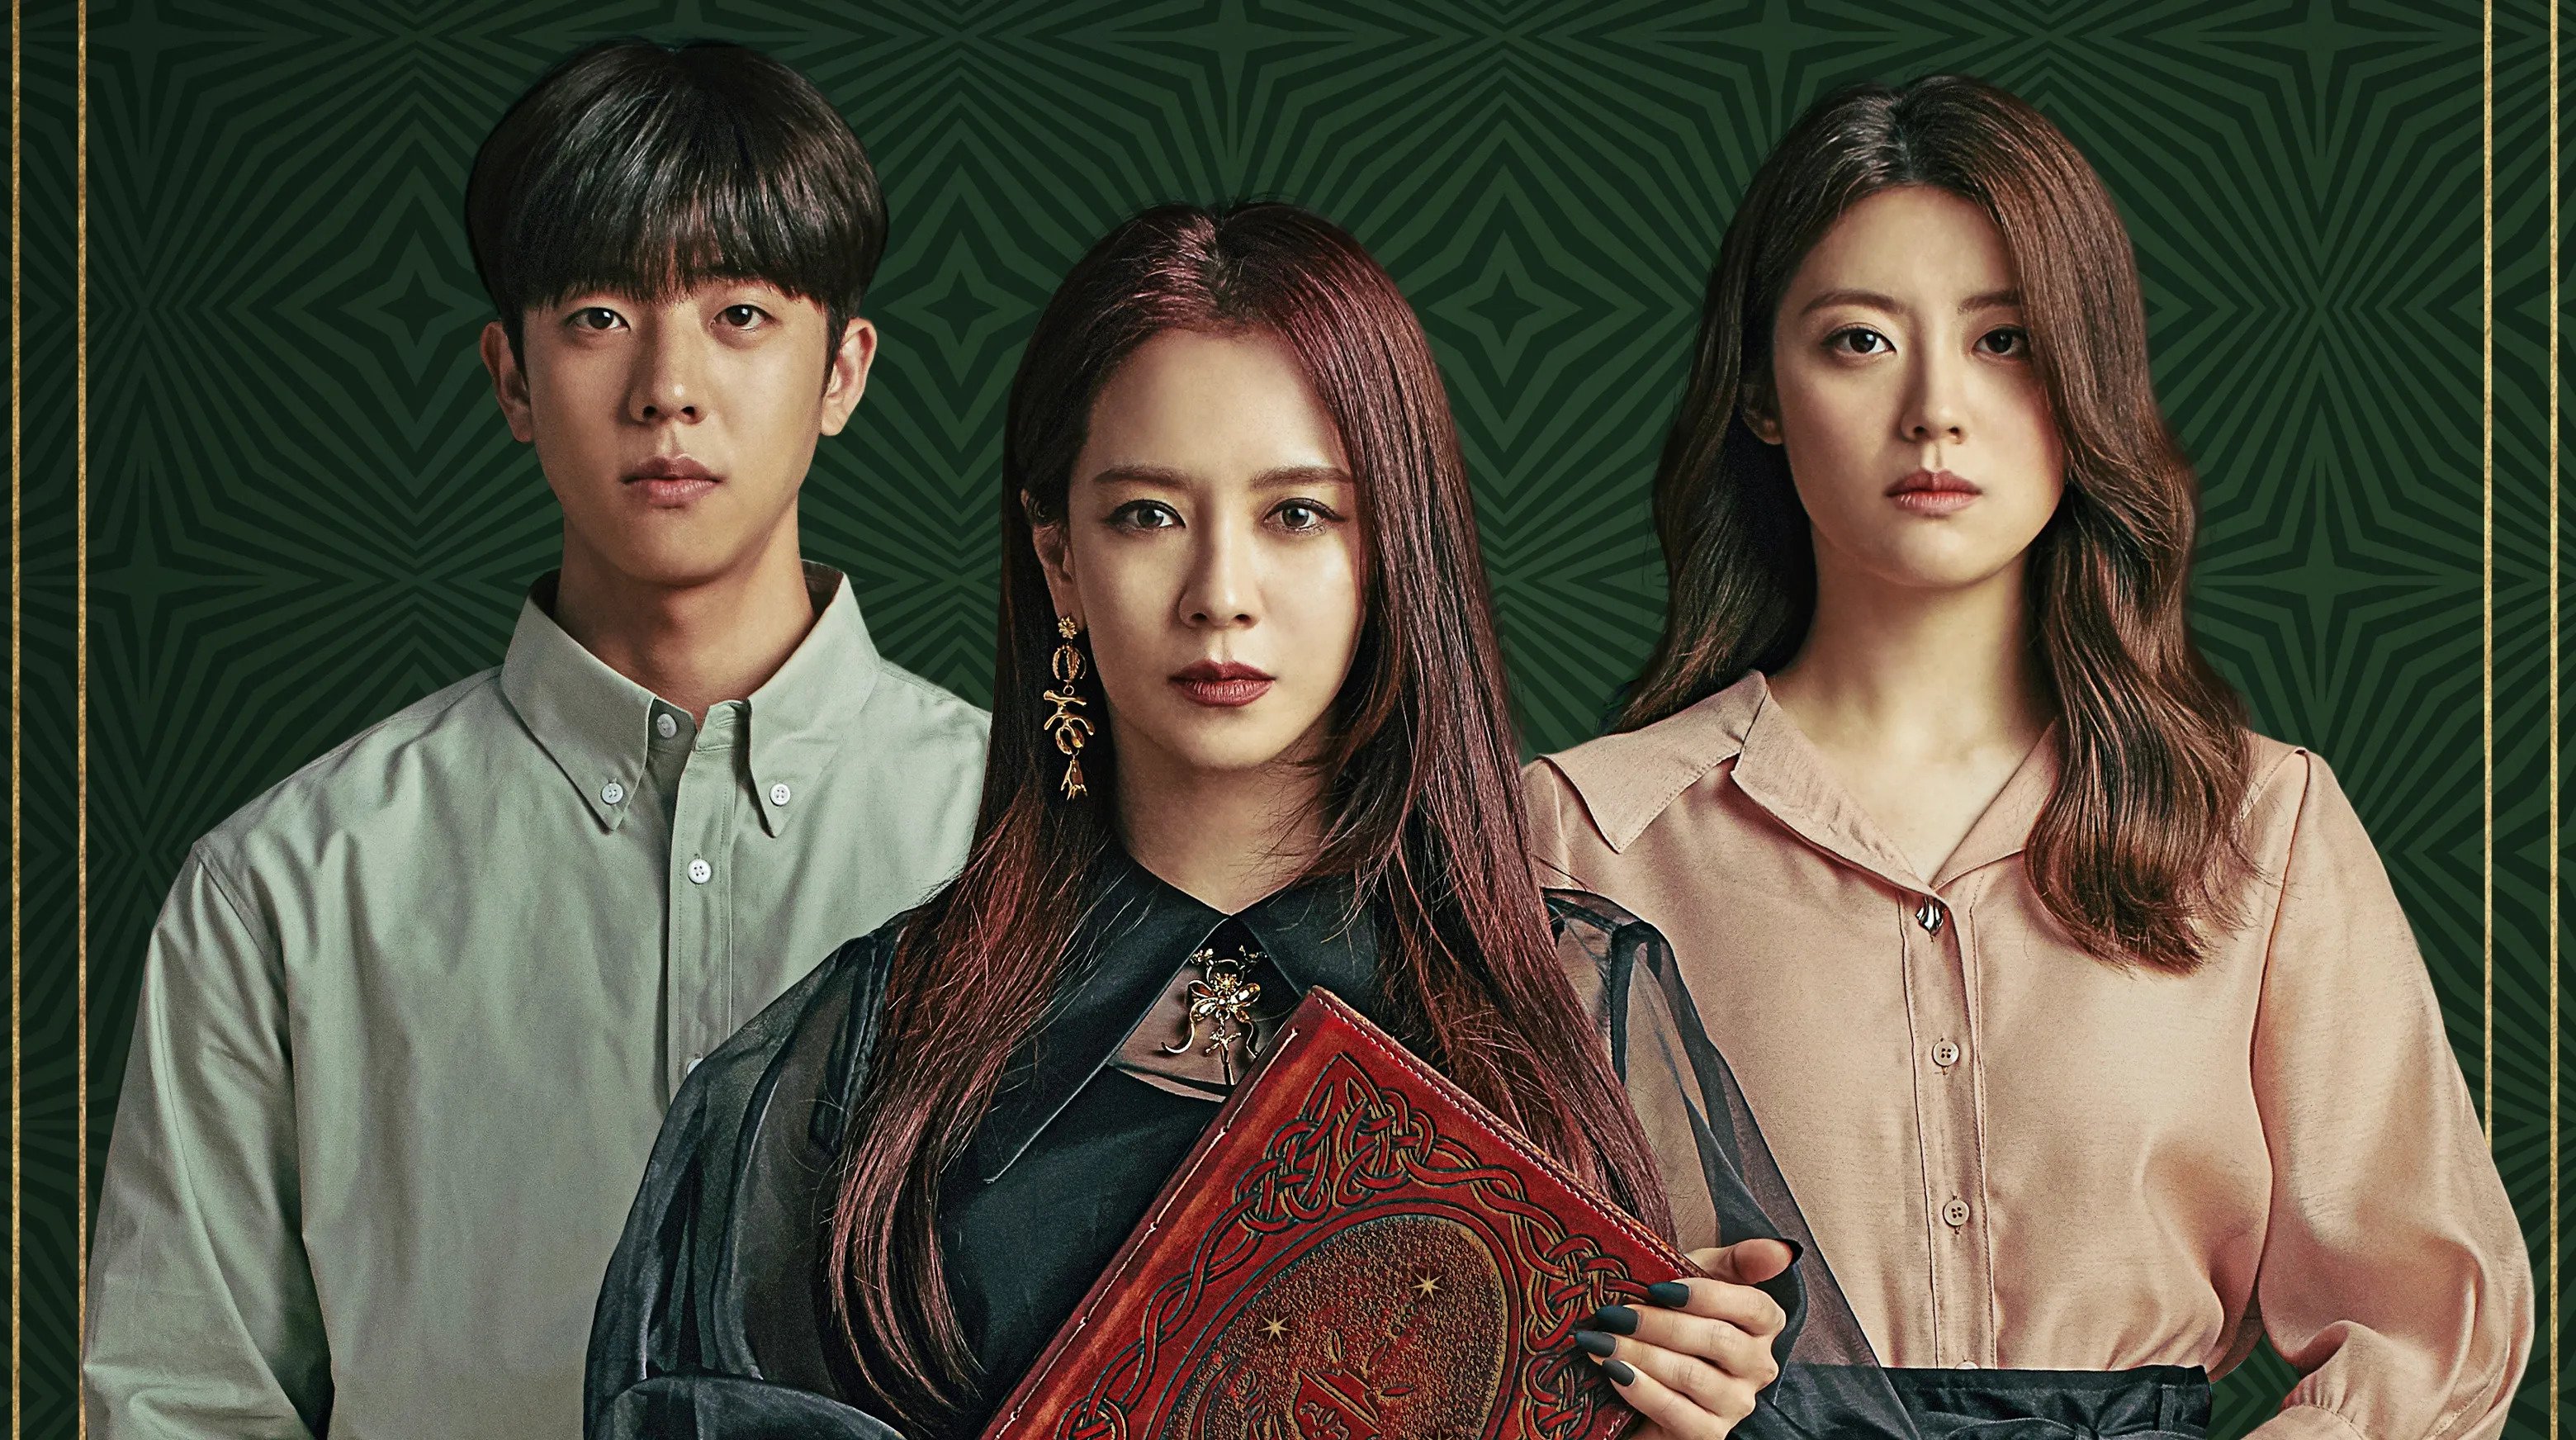 Chae Jong-Hyeop, Song Ji-Hyo and Nam Ji-Hyun 'The Witch's Diner' K-drama as their characters holding leather book